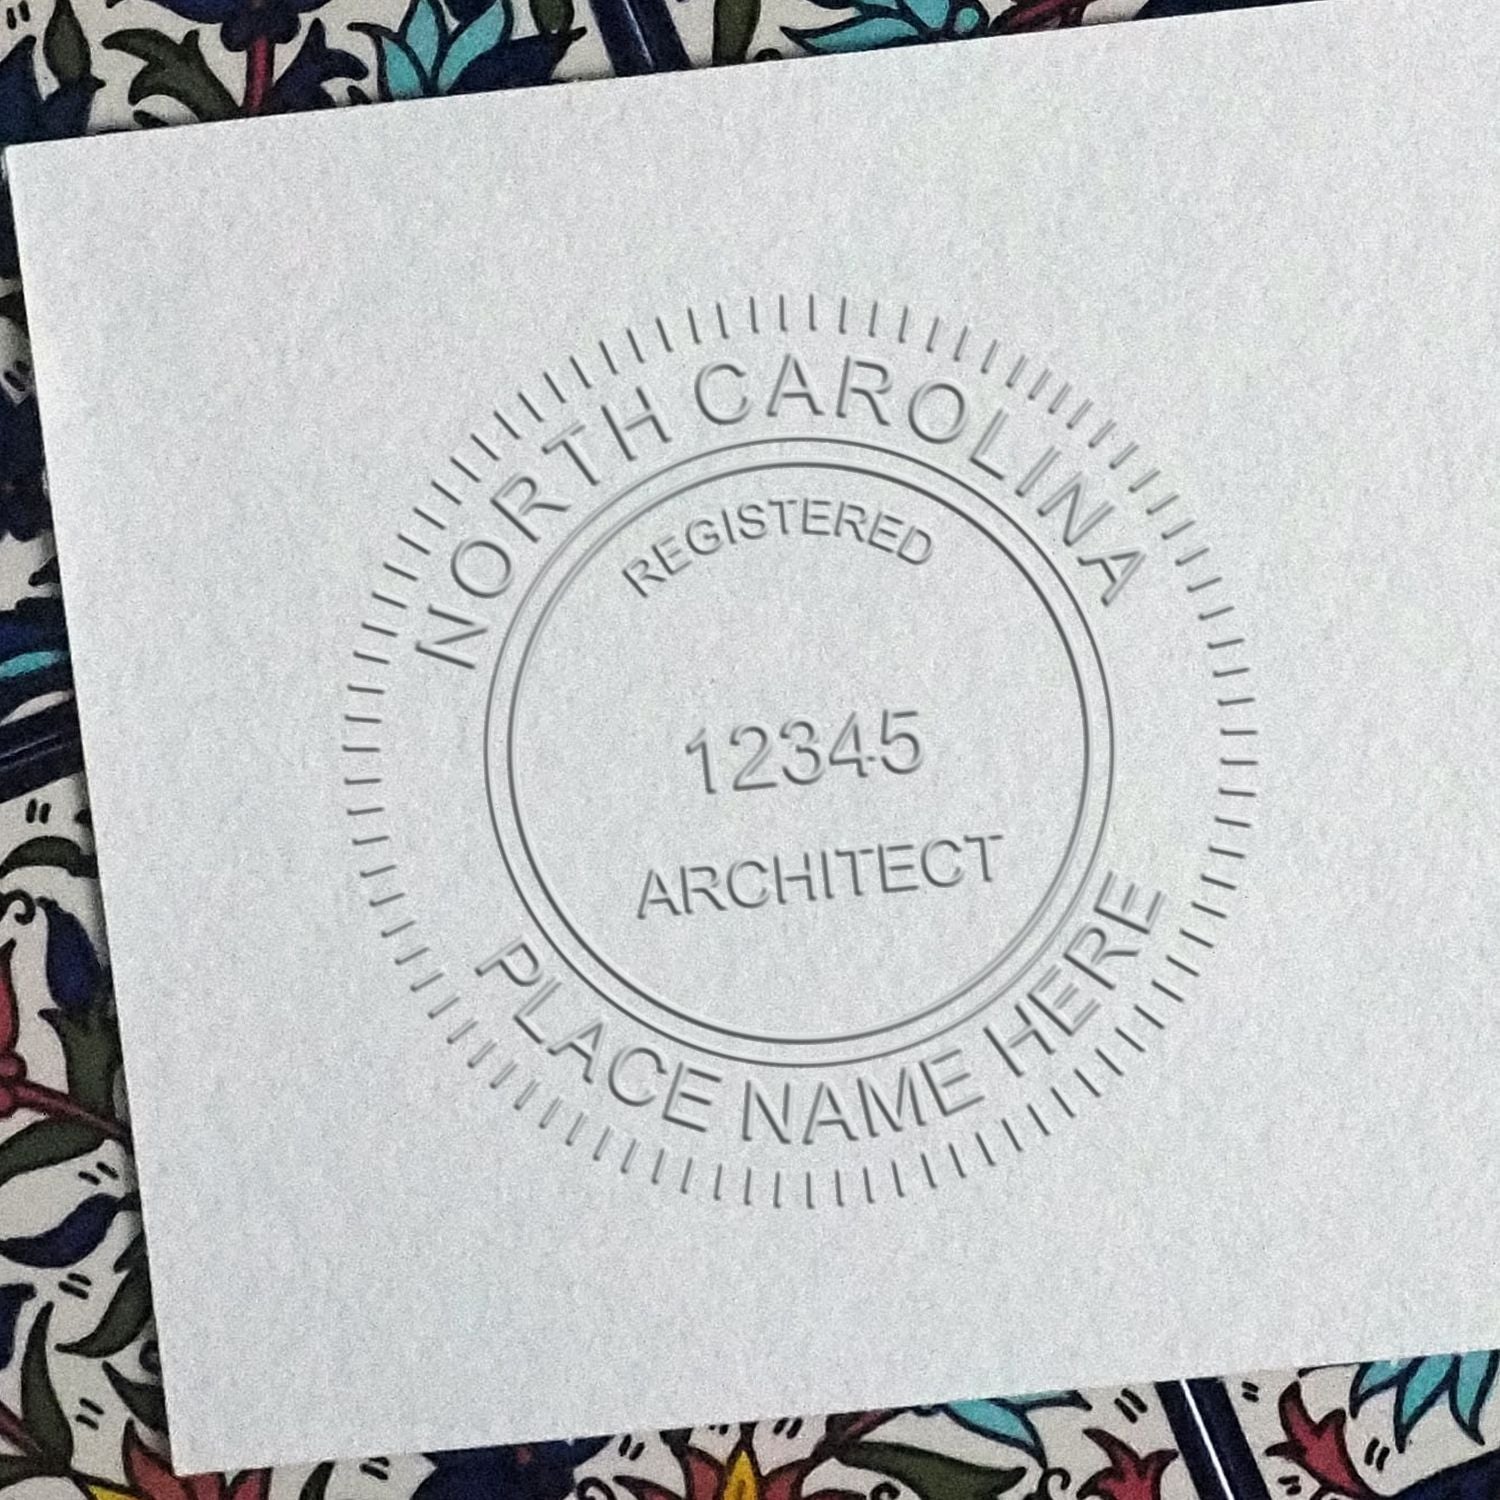 This paper is stamped with a sample imprint of the Extended Long Reach North Carolina Architect Seal Embosser, signifying its quality and reliability.